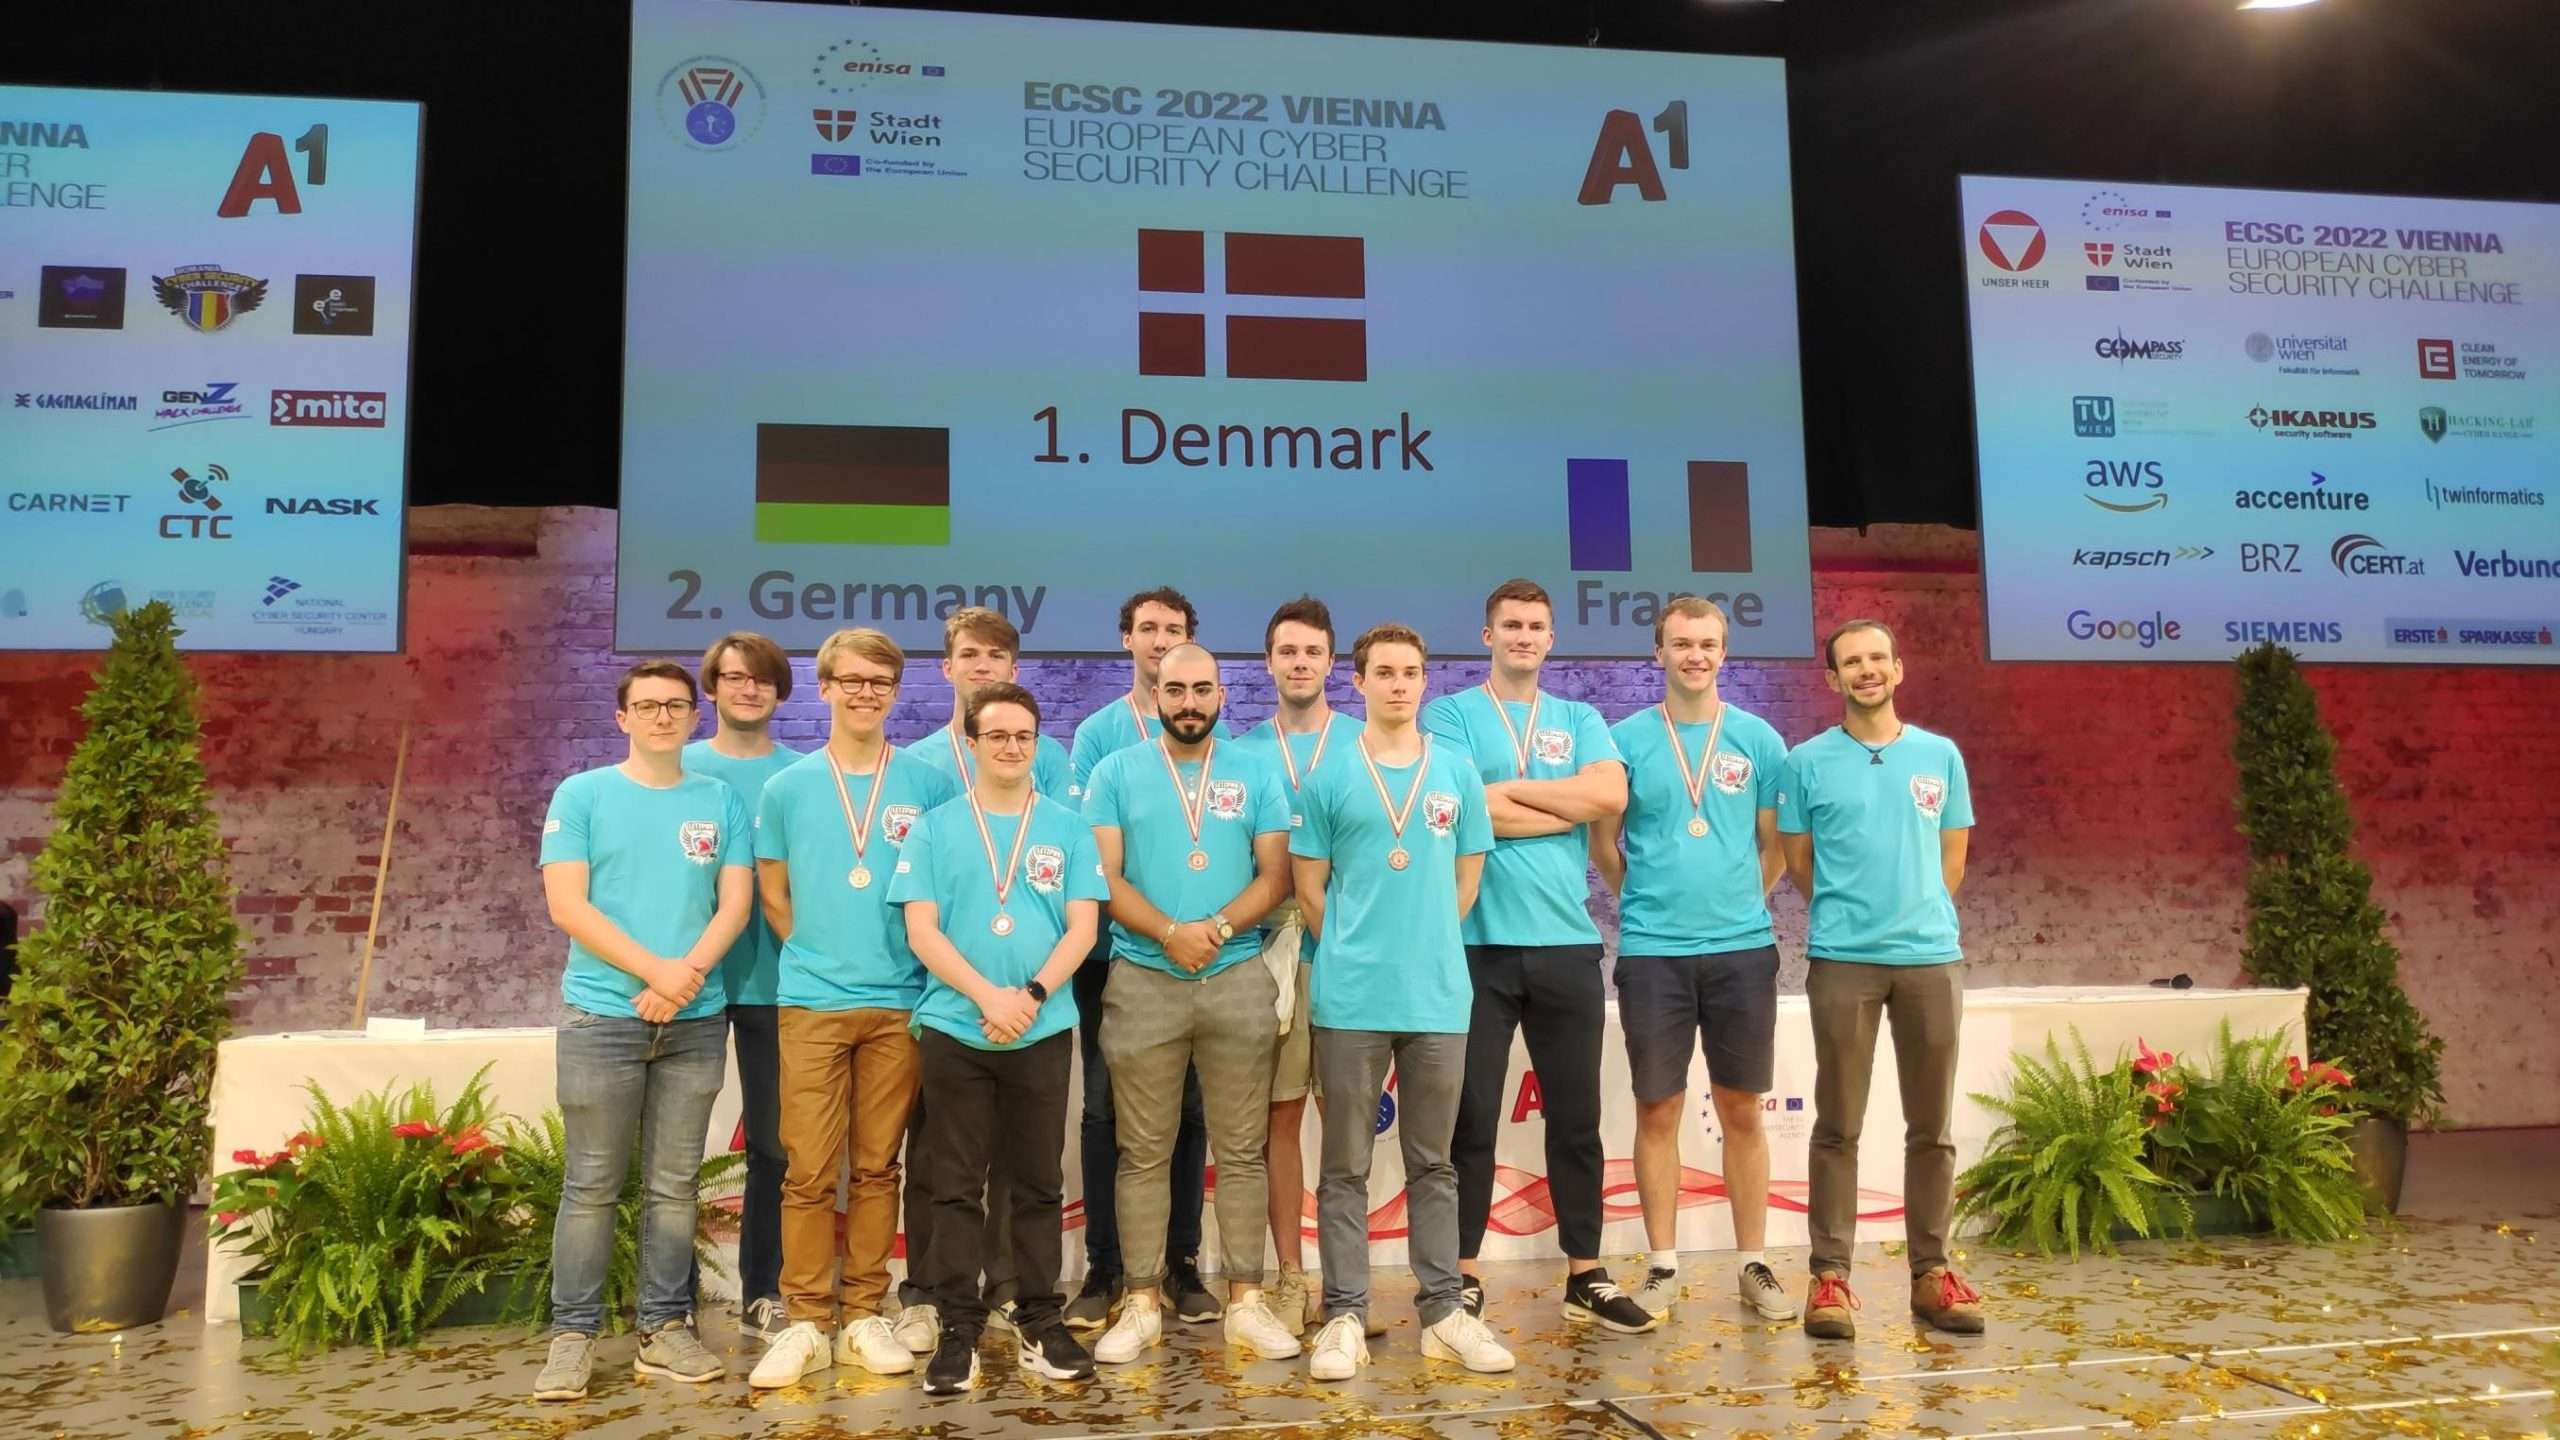 The national team performed well at the European Cybersecurity Challenge